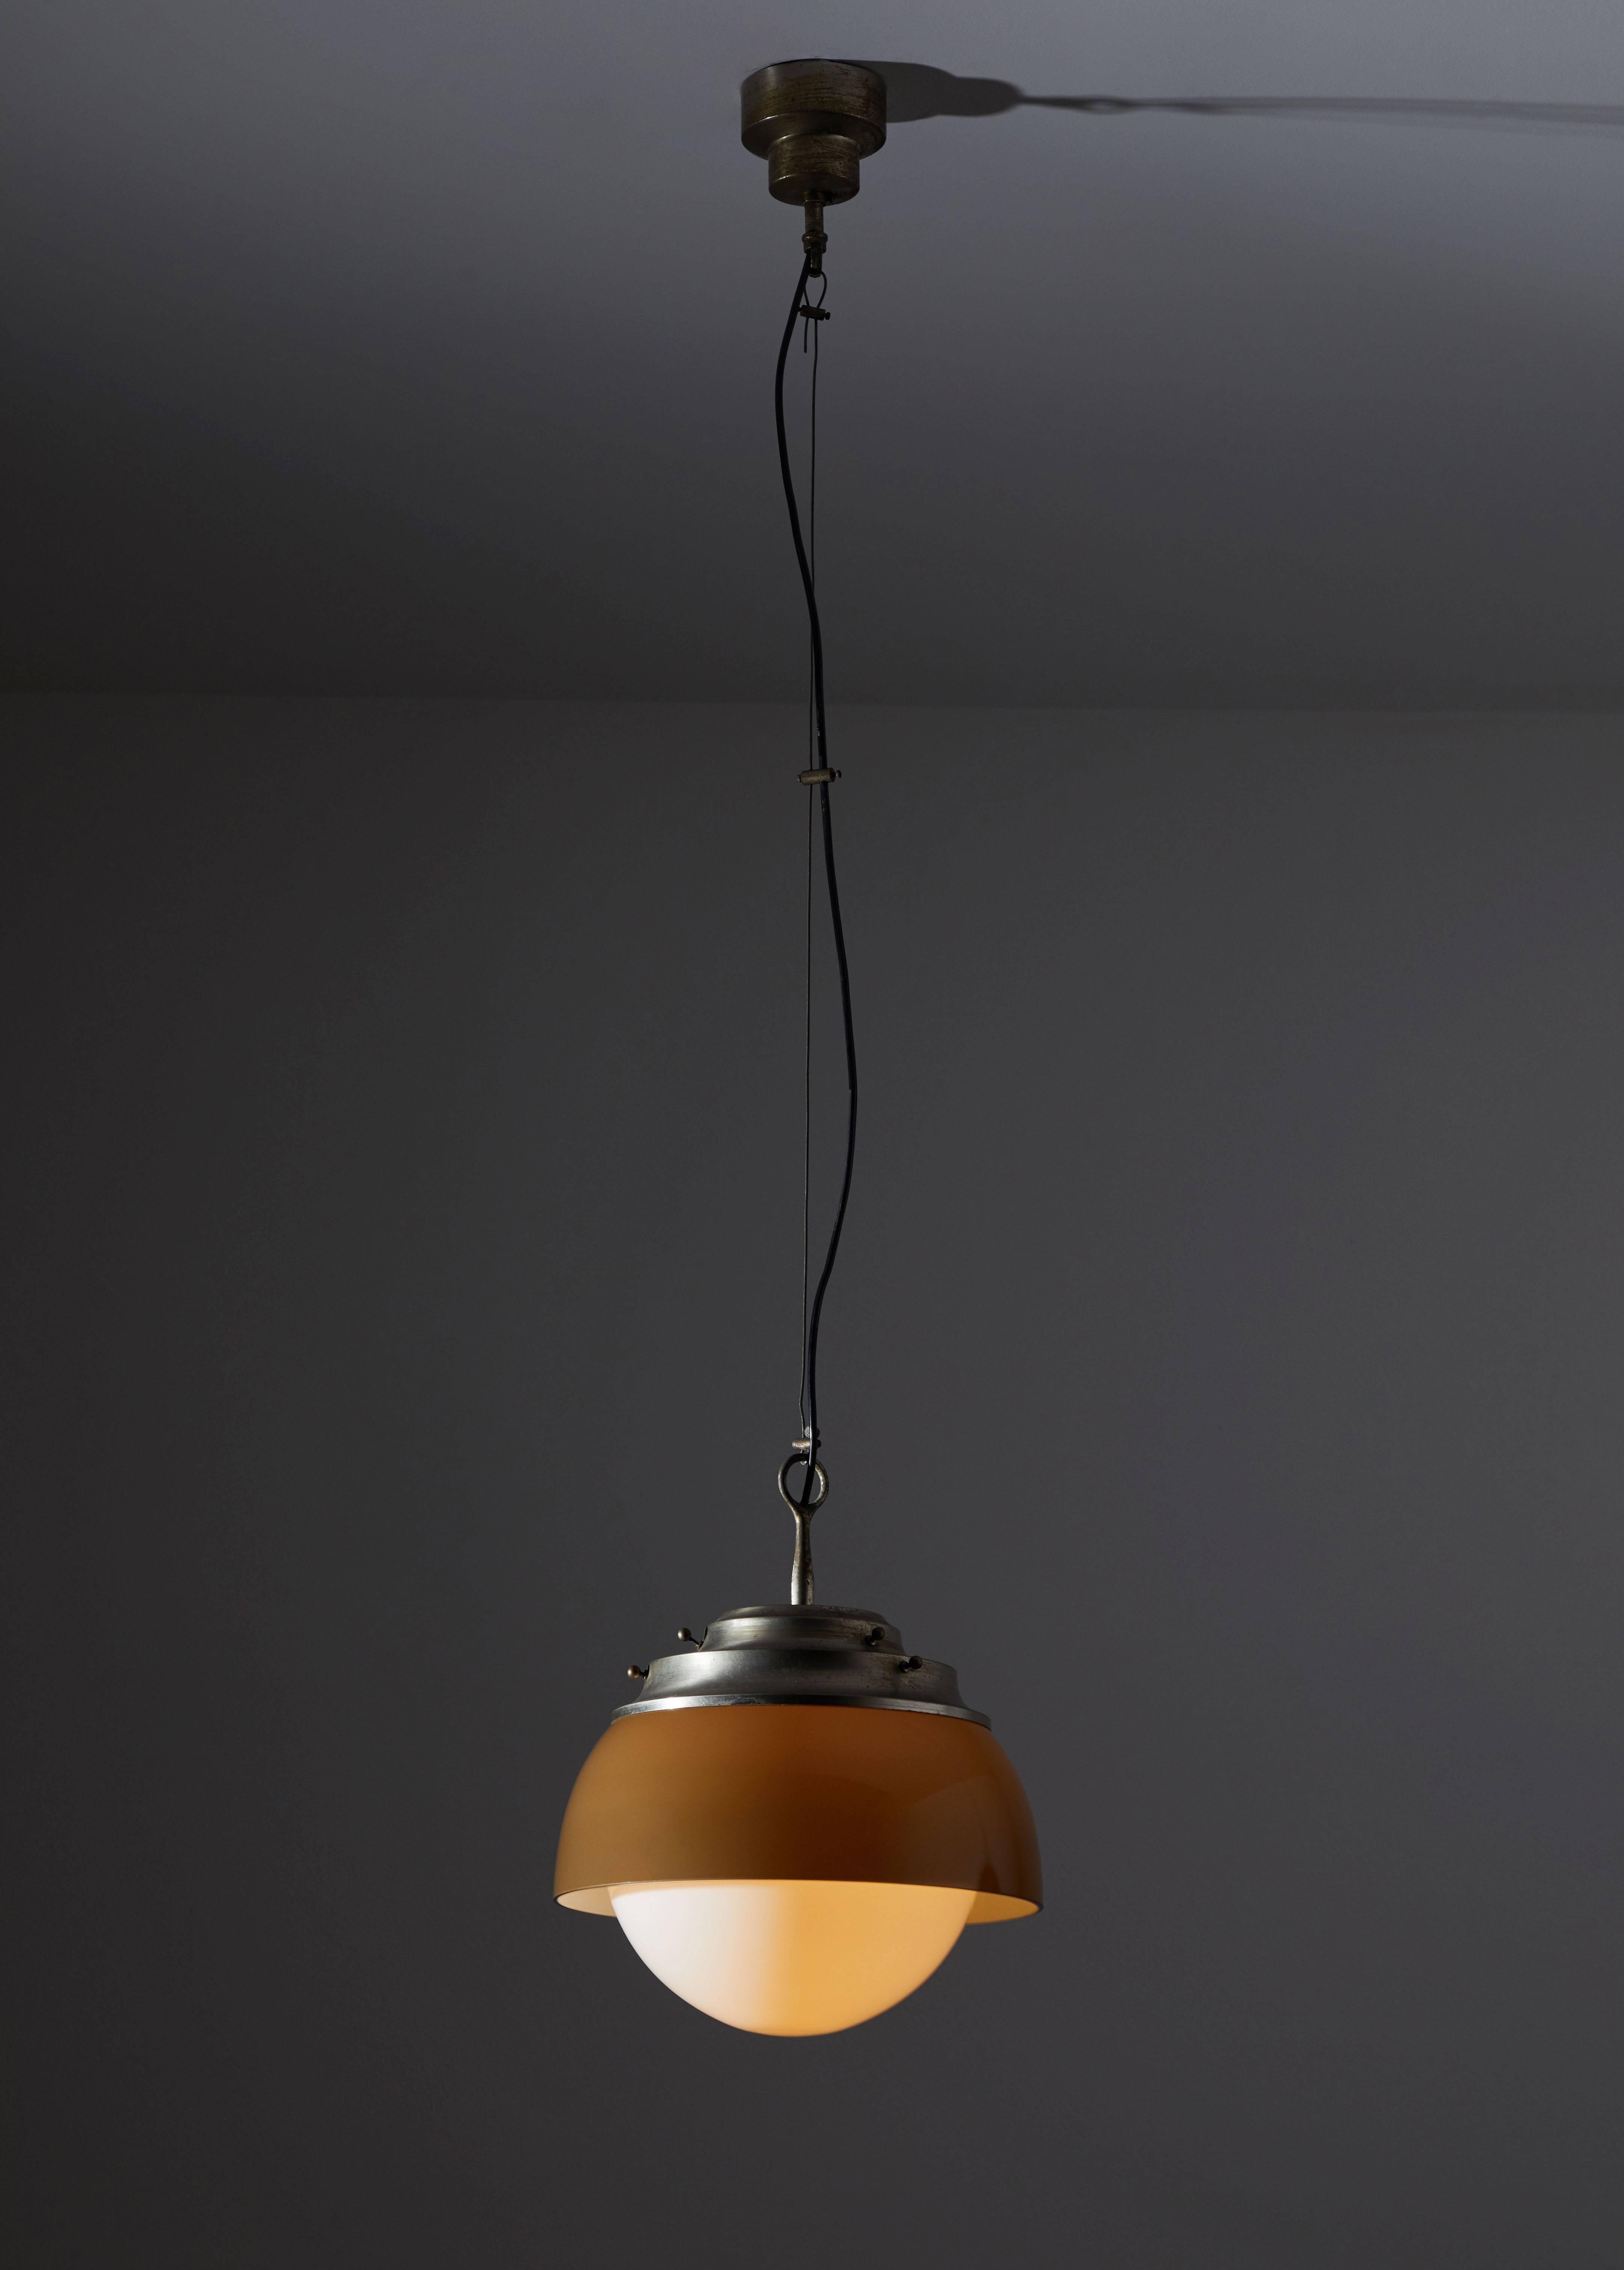 Single Pendant by Artemide. Designed and manufactured in Italy, circa 1960s. Glass diffuser and shade with nickel-plated brass hardware. Wired for US junction boxes. Pendant takes one E27 100w maximum bulb. Overall drop can be adjusted.